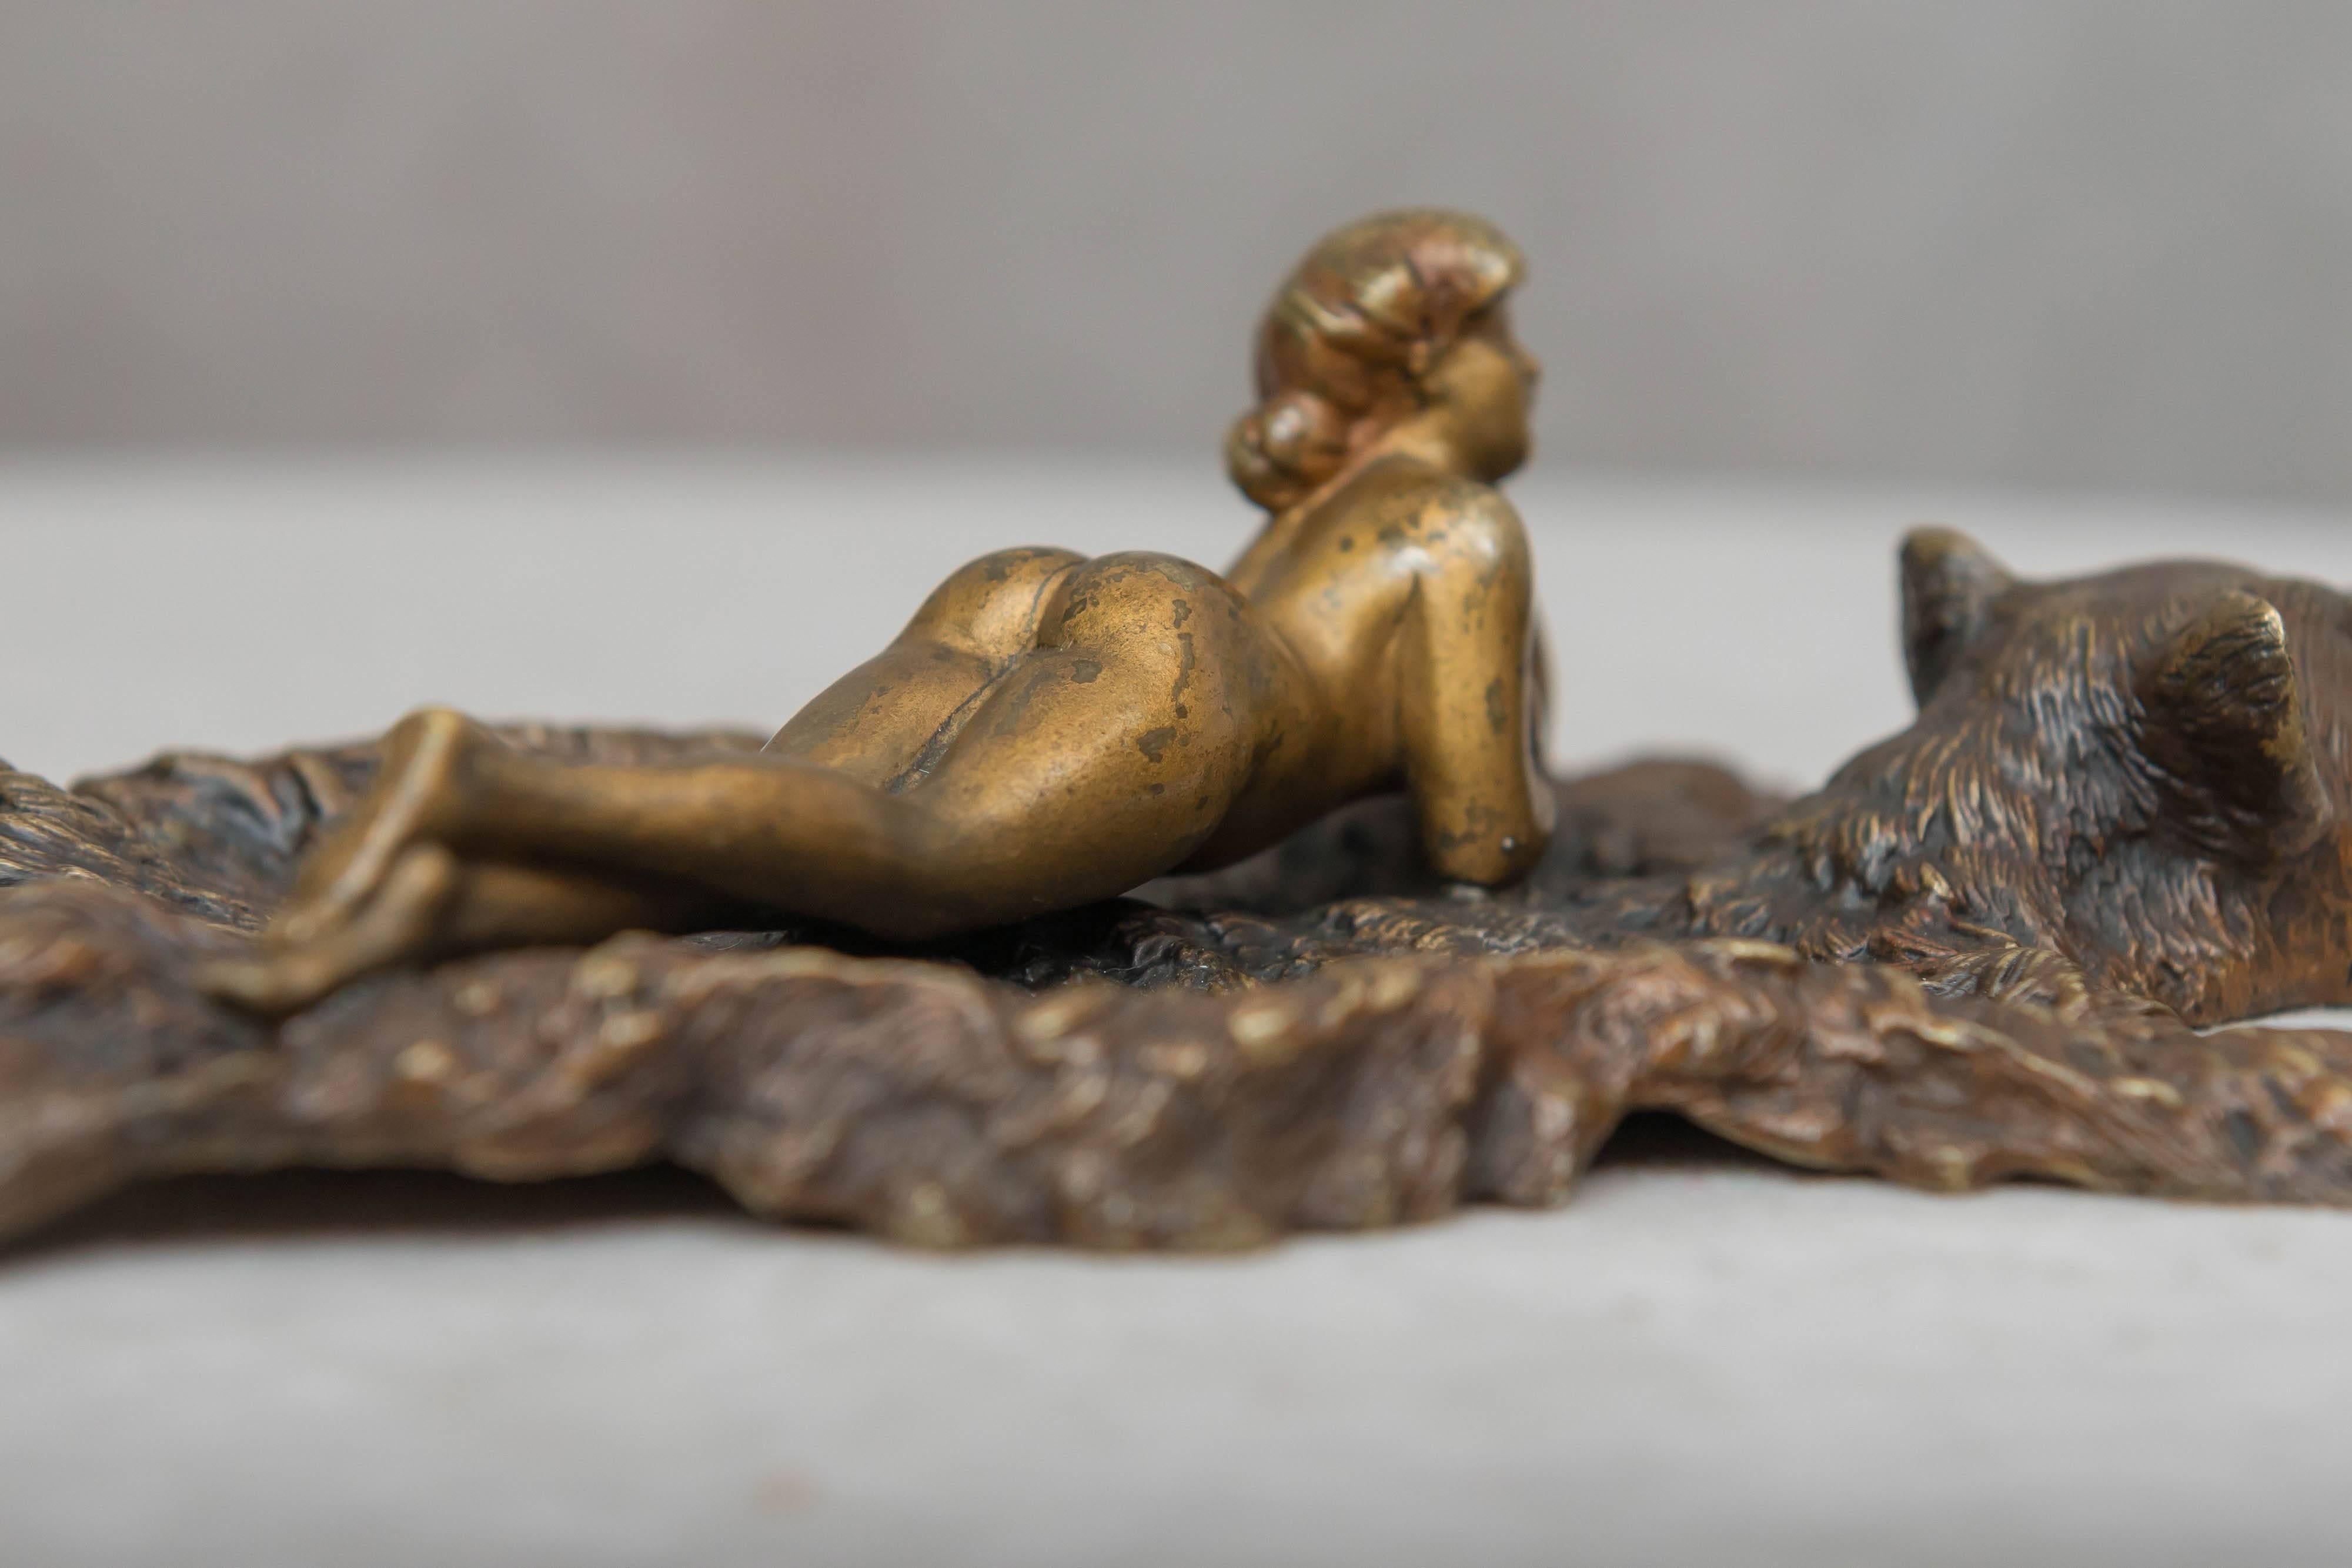 Cold-Painted Austrian Bronze of a Nude Woman Lying on a Bearskin Rug by Franz Bergmann